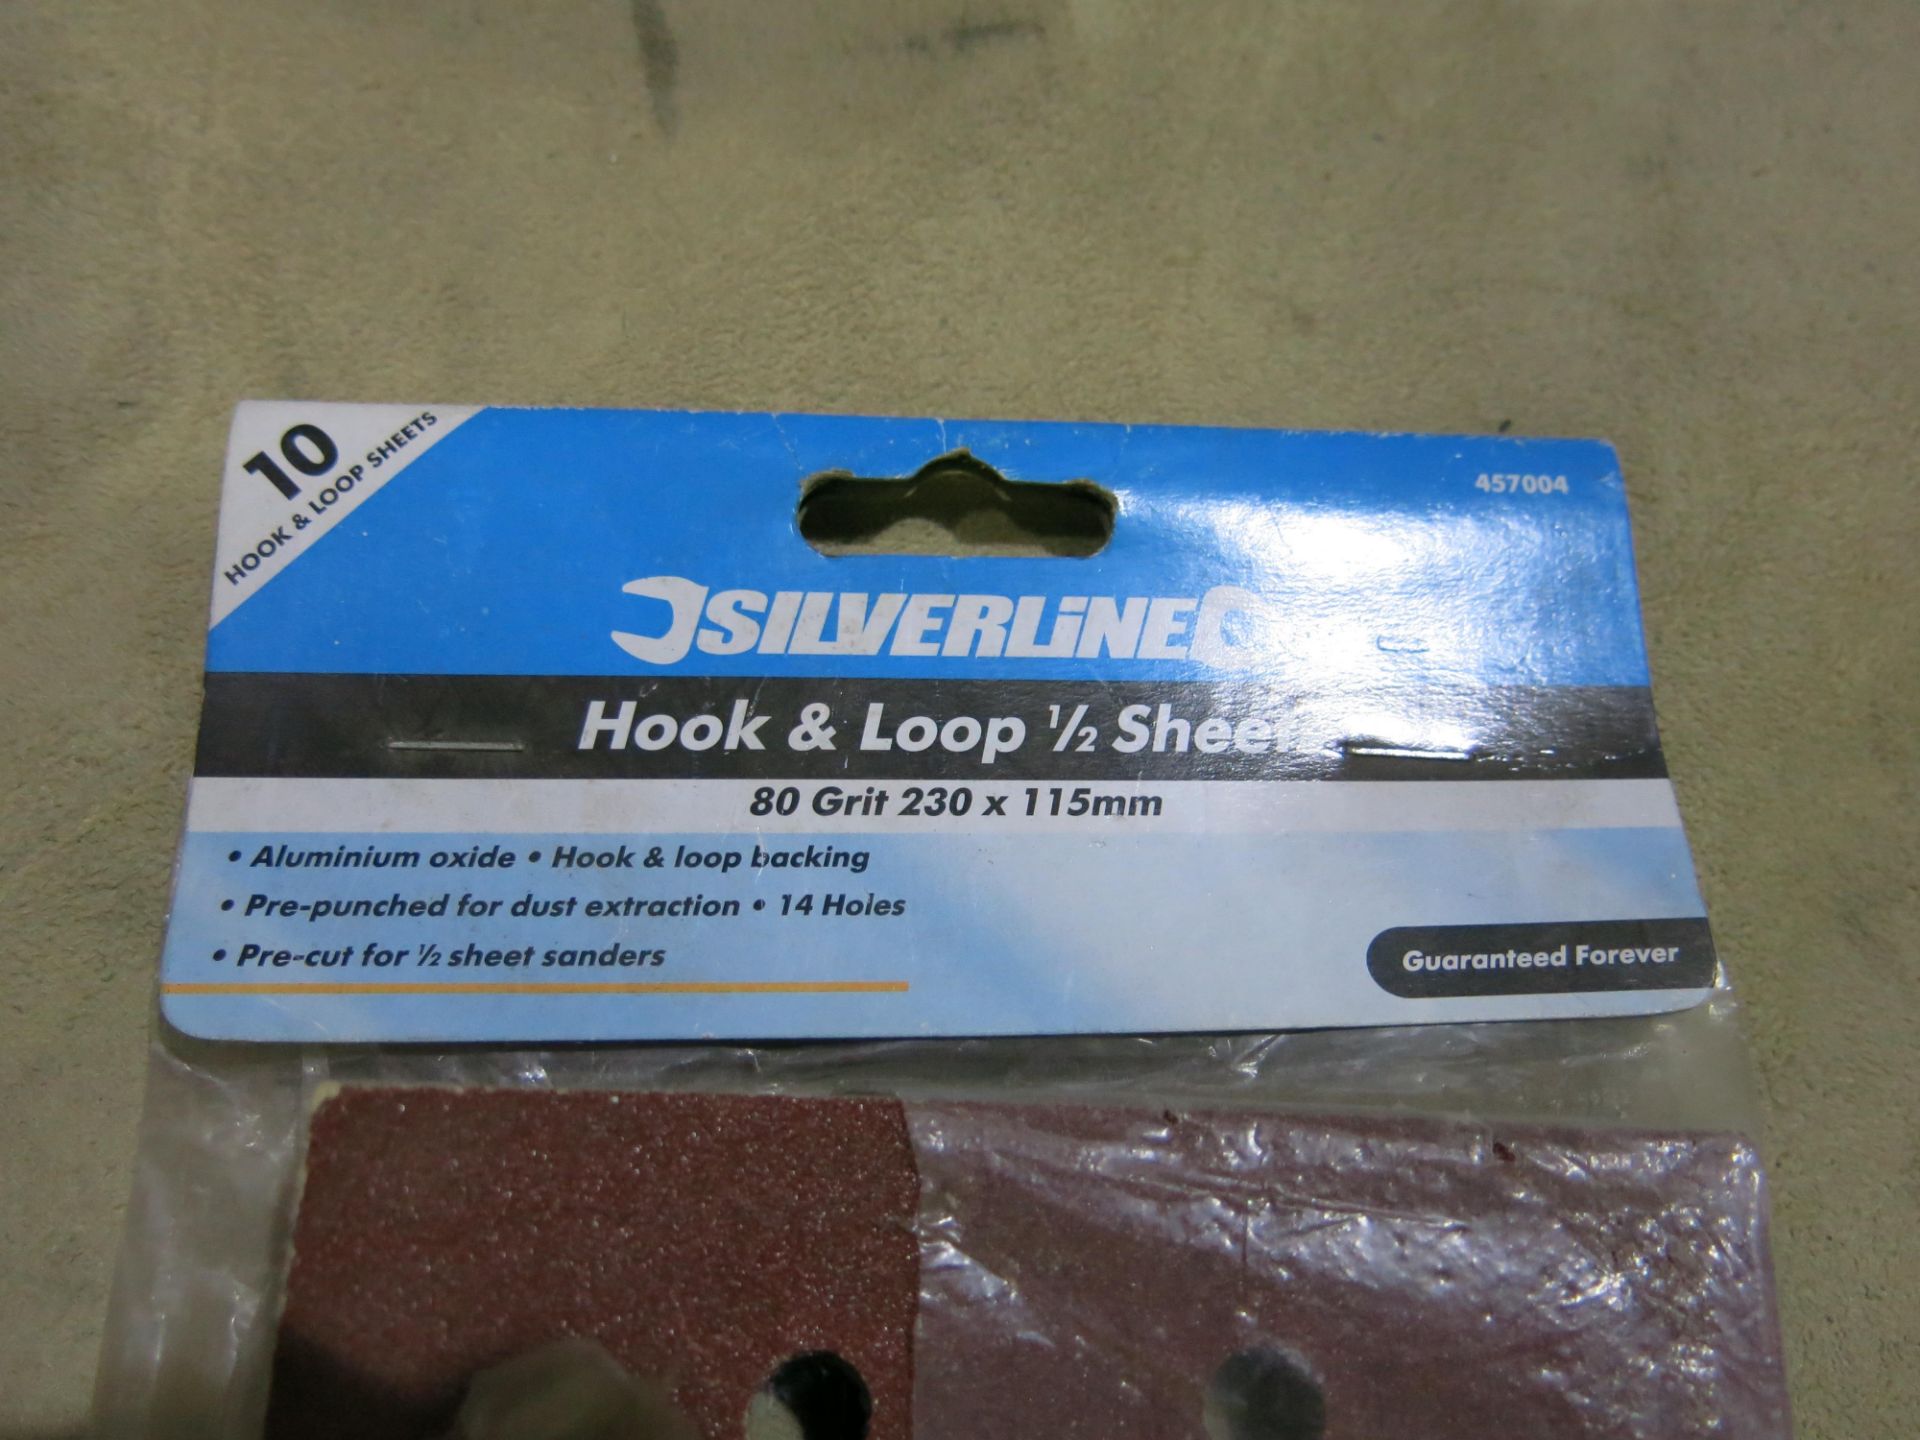 * 2 x Boxes of Silverline hook & loop sheets, 80 grit 230 x 115mm - Image 3 of 3